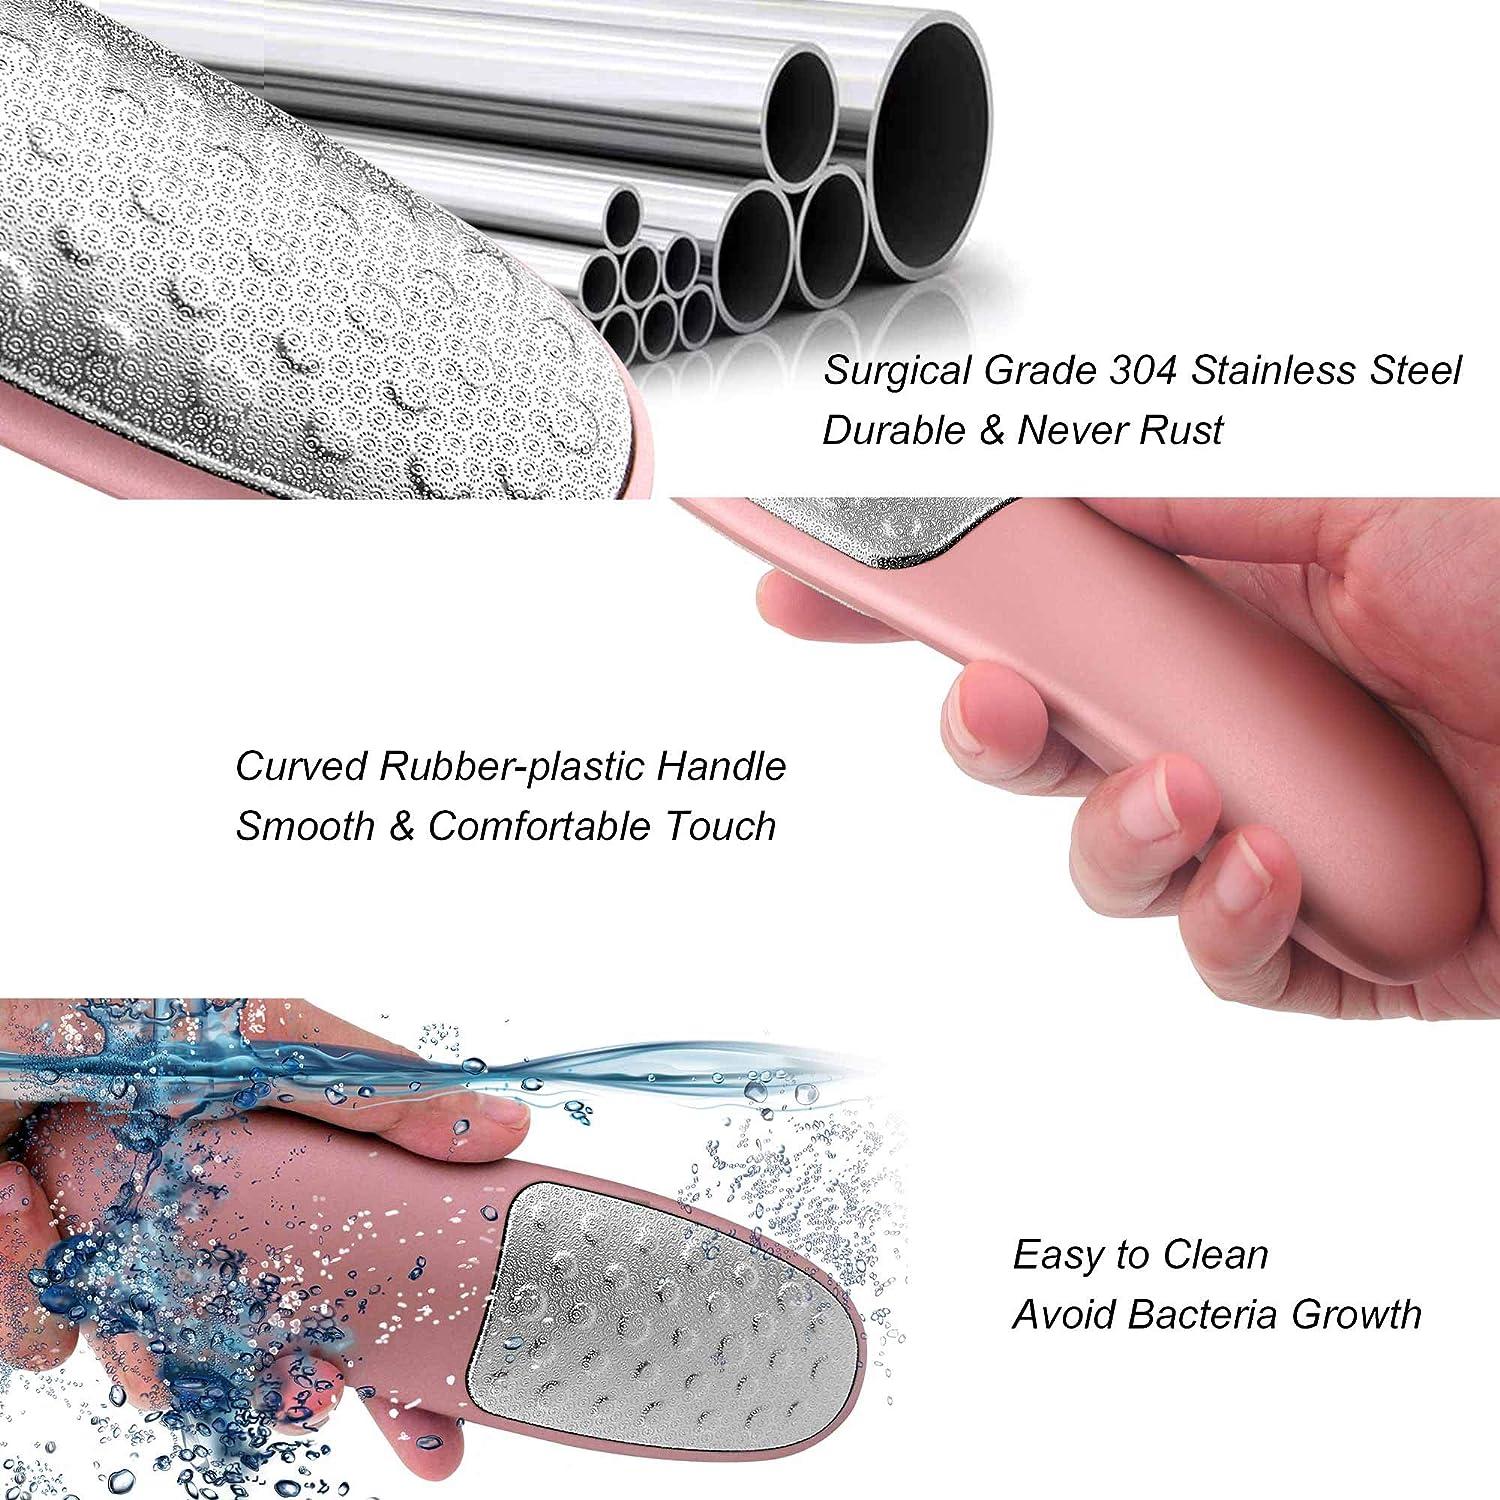 Hard Dry Dead Cuticle Skin Remover Home Foot Care Tool Foot